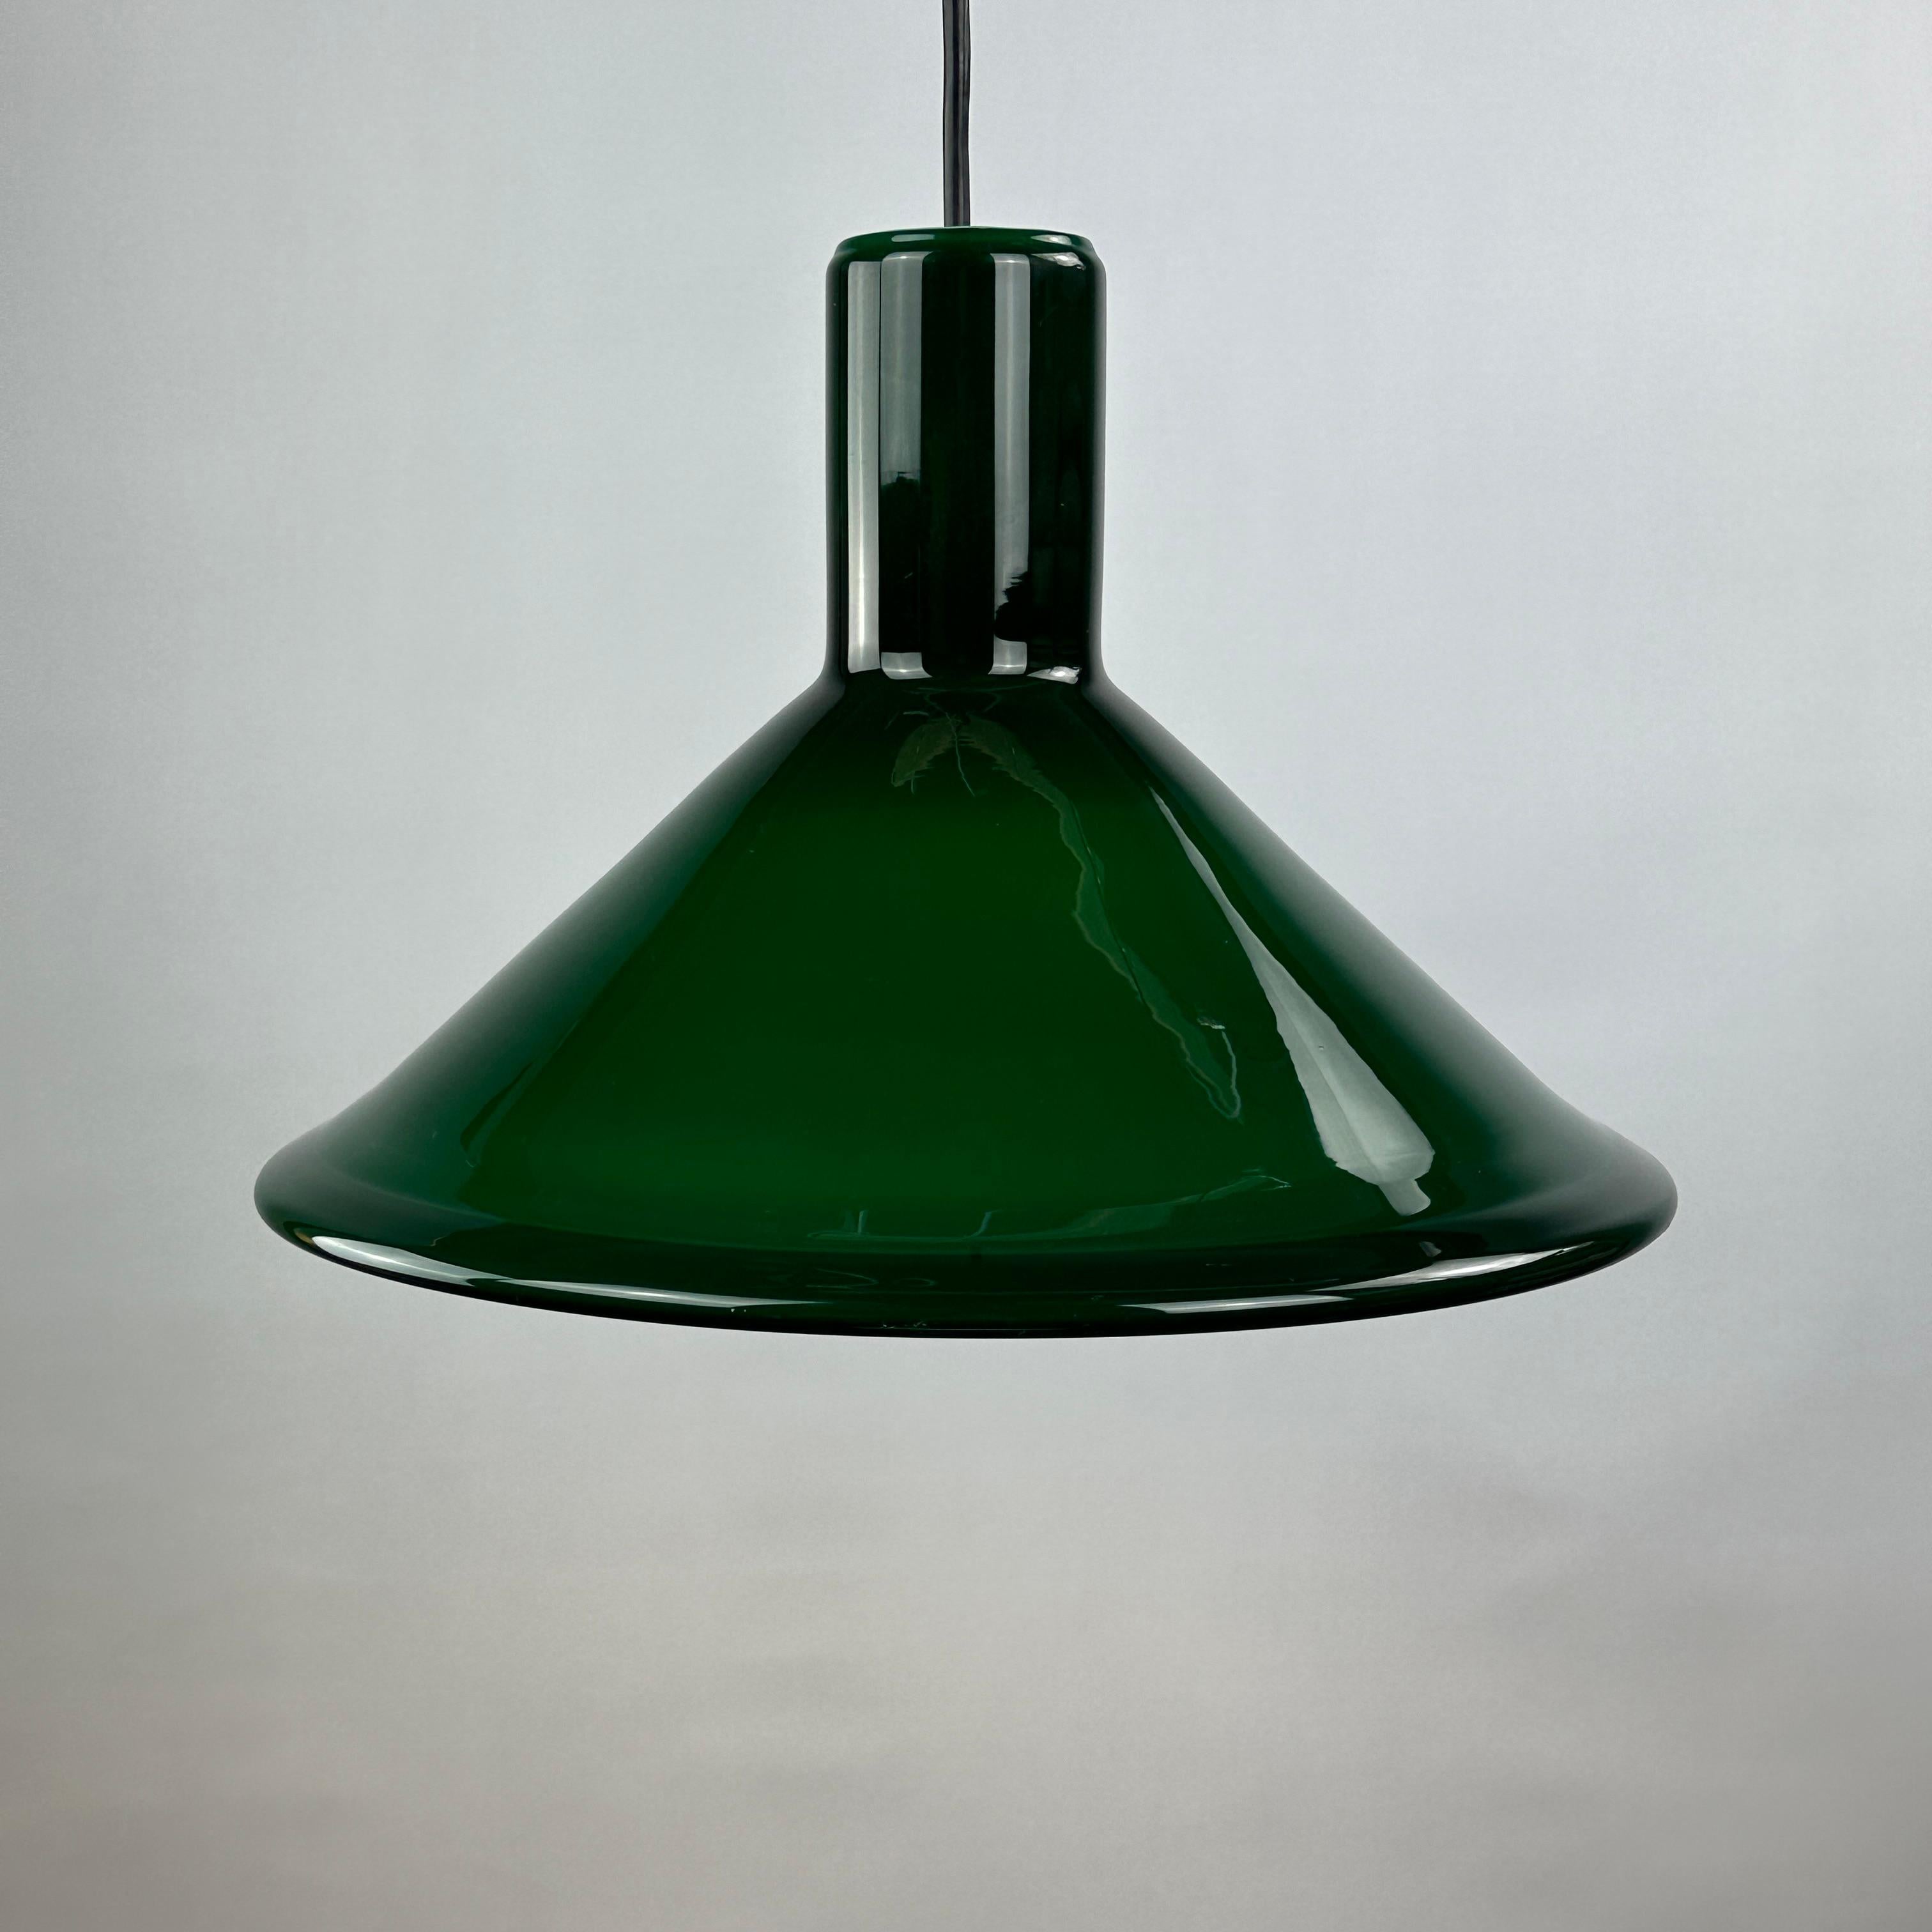 Cool and stylish green thick glass pendant light by the Danish Michael Bang for Holmegaard. This model is called P & T PENDEL and was designed in 1972.

High quality thick opaline glas, gives a very pleasant light. Holmegaard specialized in mouth